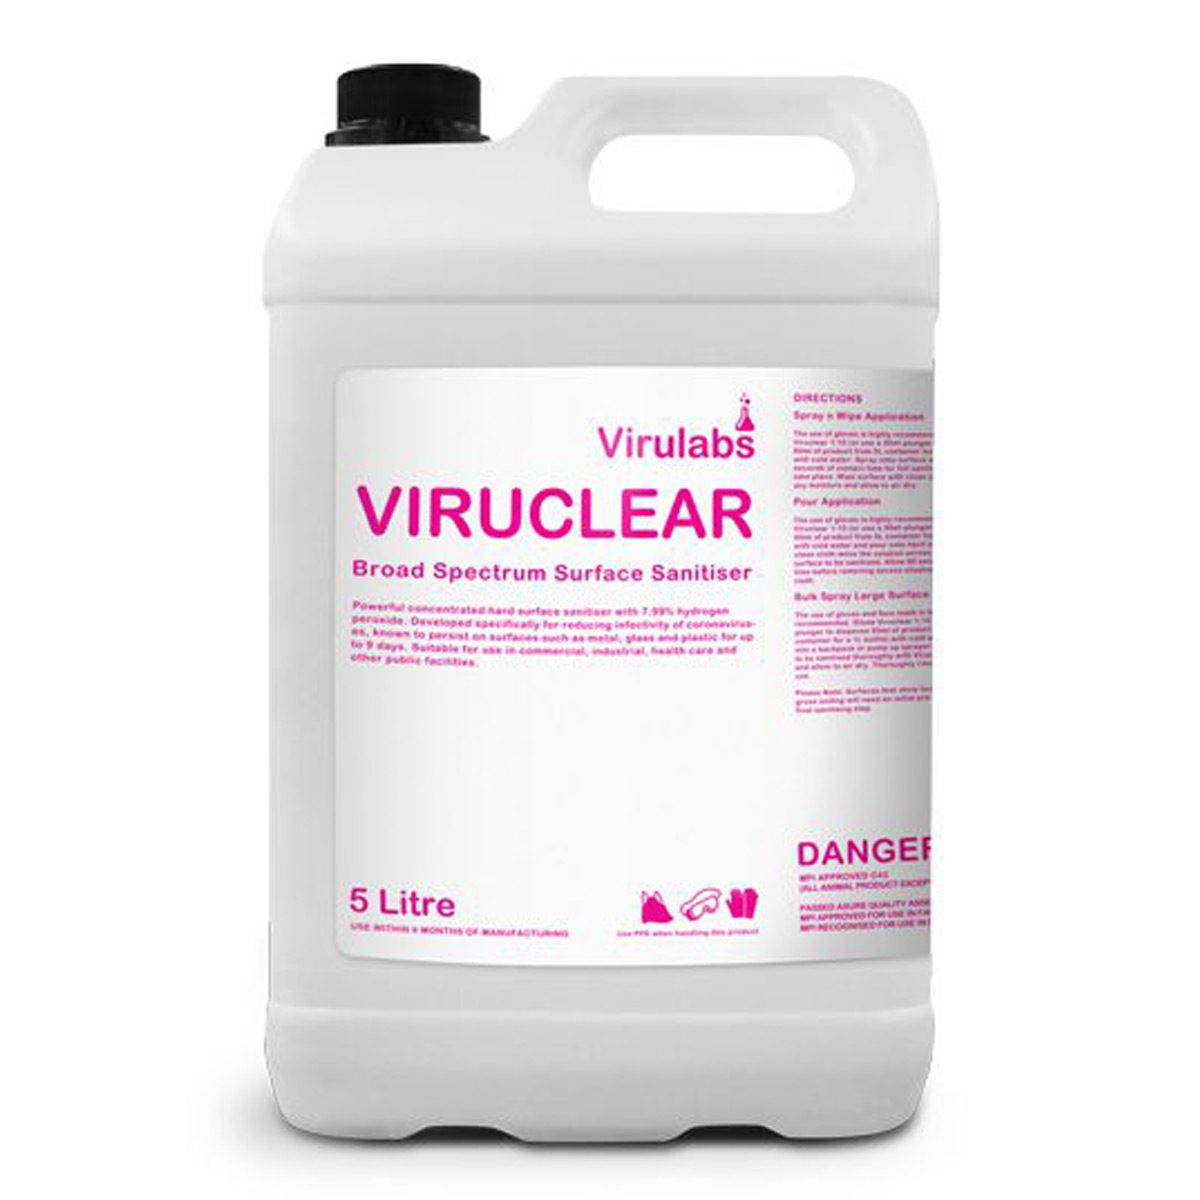 cleaning-products-disinfectants-and-sanitisers-virulabs-viruclear-5L-litre-for-reducing-infectivity-of-coronaviruses-commercial-industrial-health-care-public-facilities-vjs-distributors-KVCLEAR5